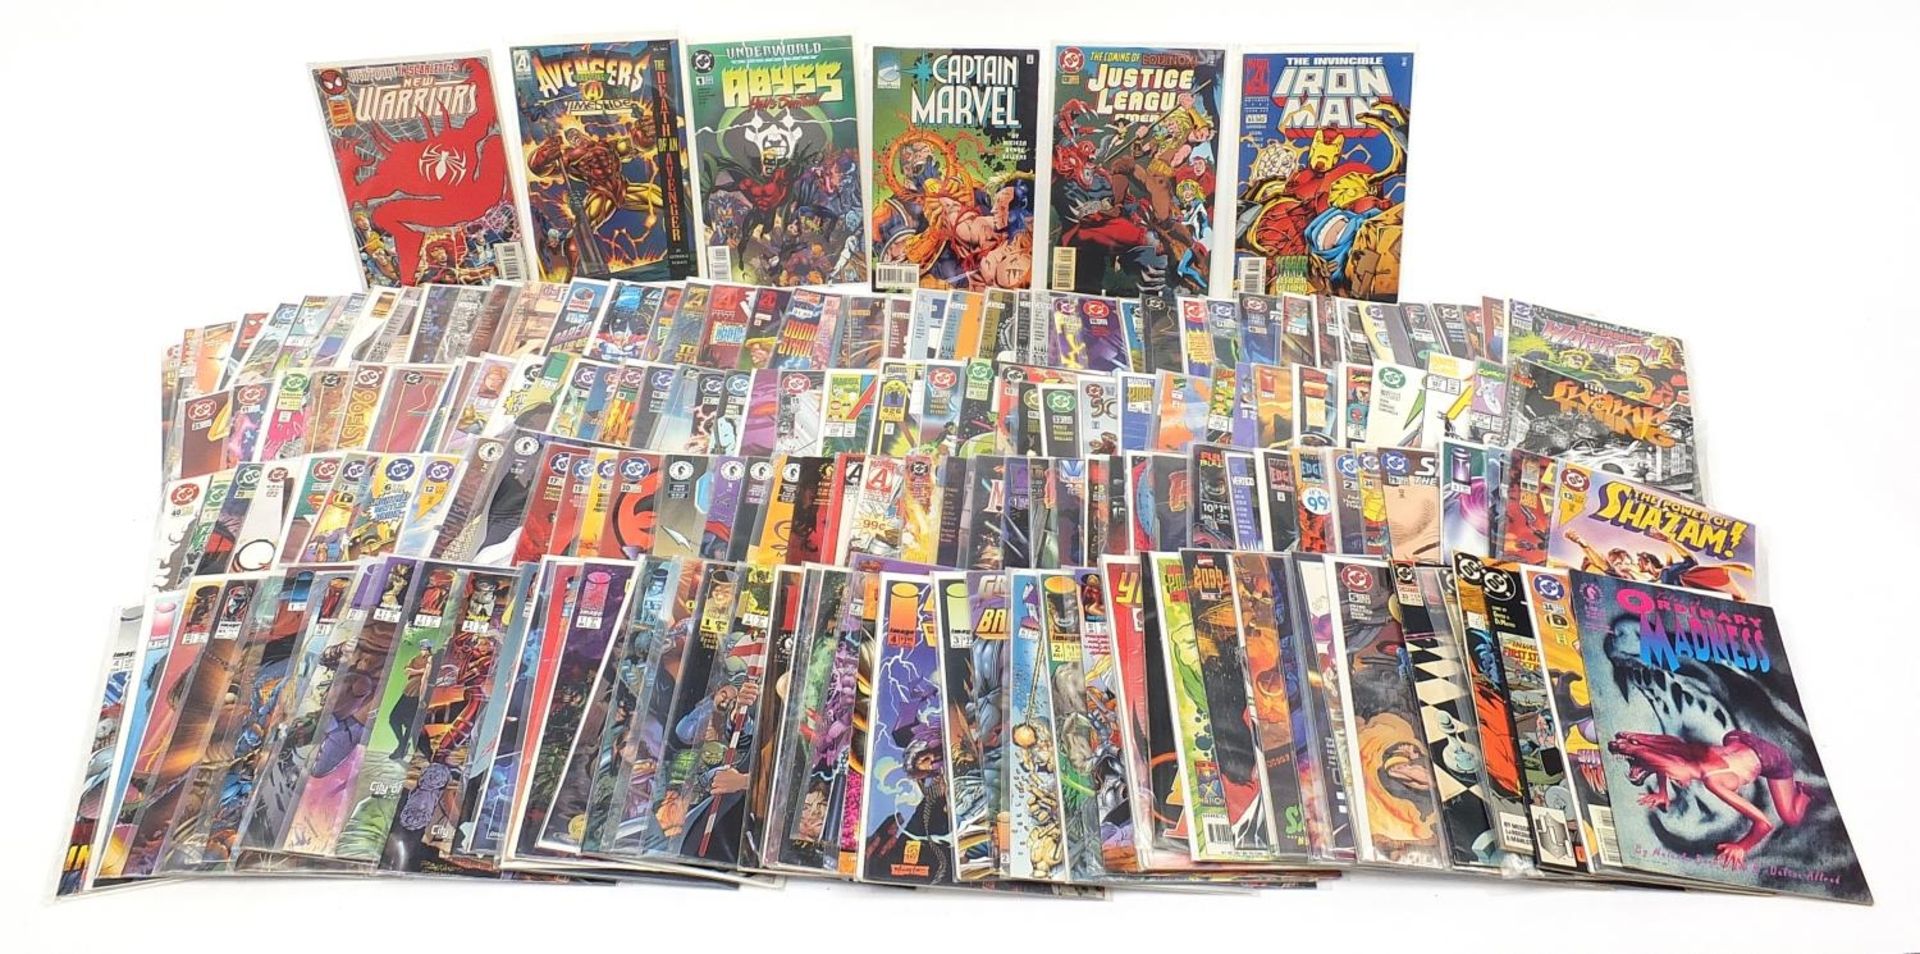 Collection of vintage and later comics including Marvel, Avengers, Storm Watch, Gen 13 and DC :For